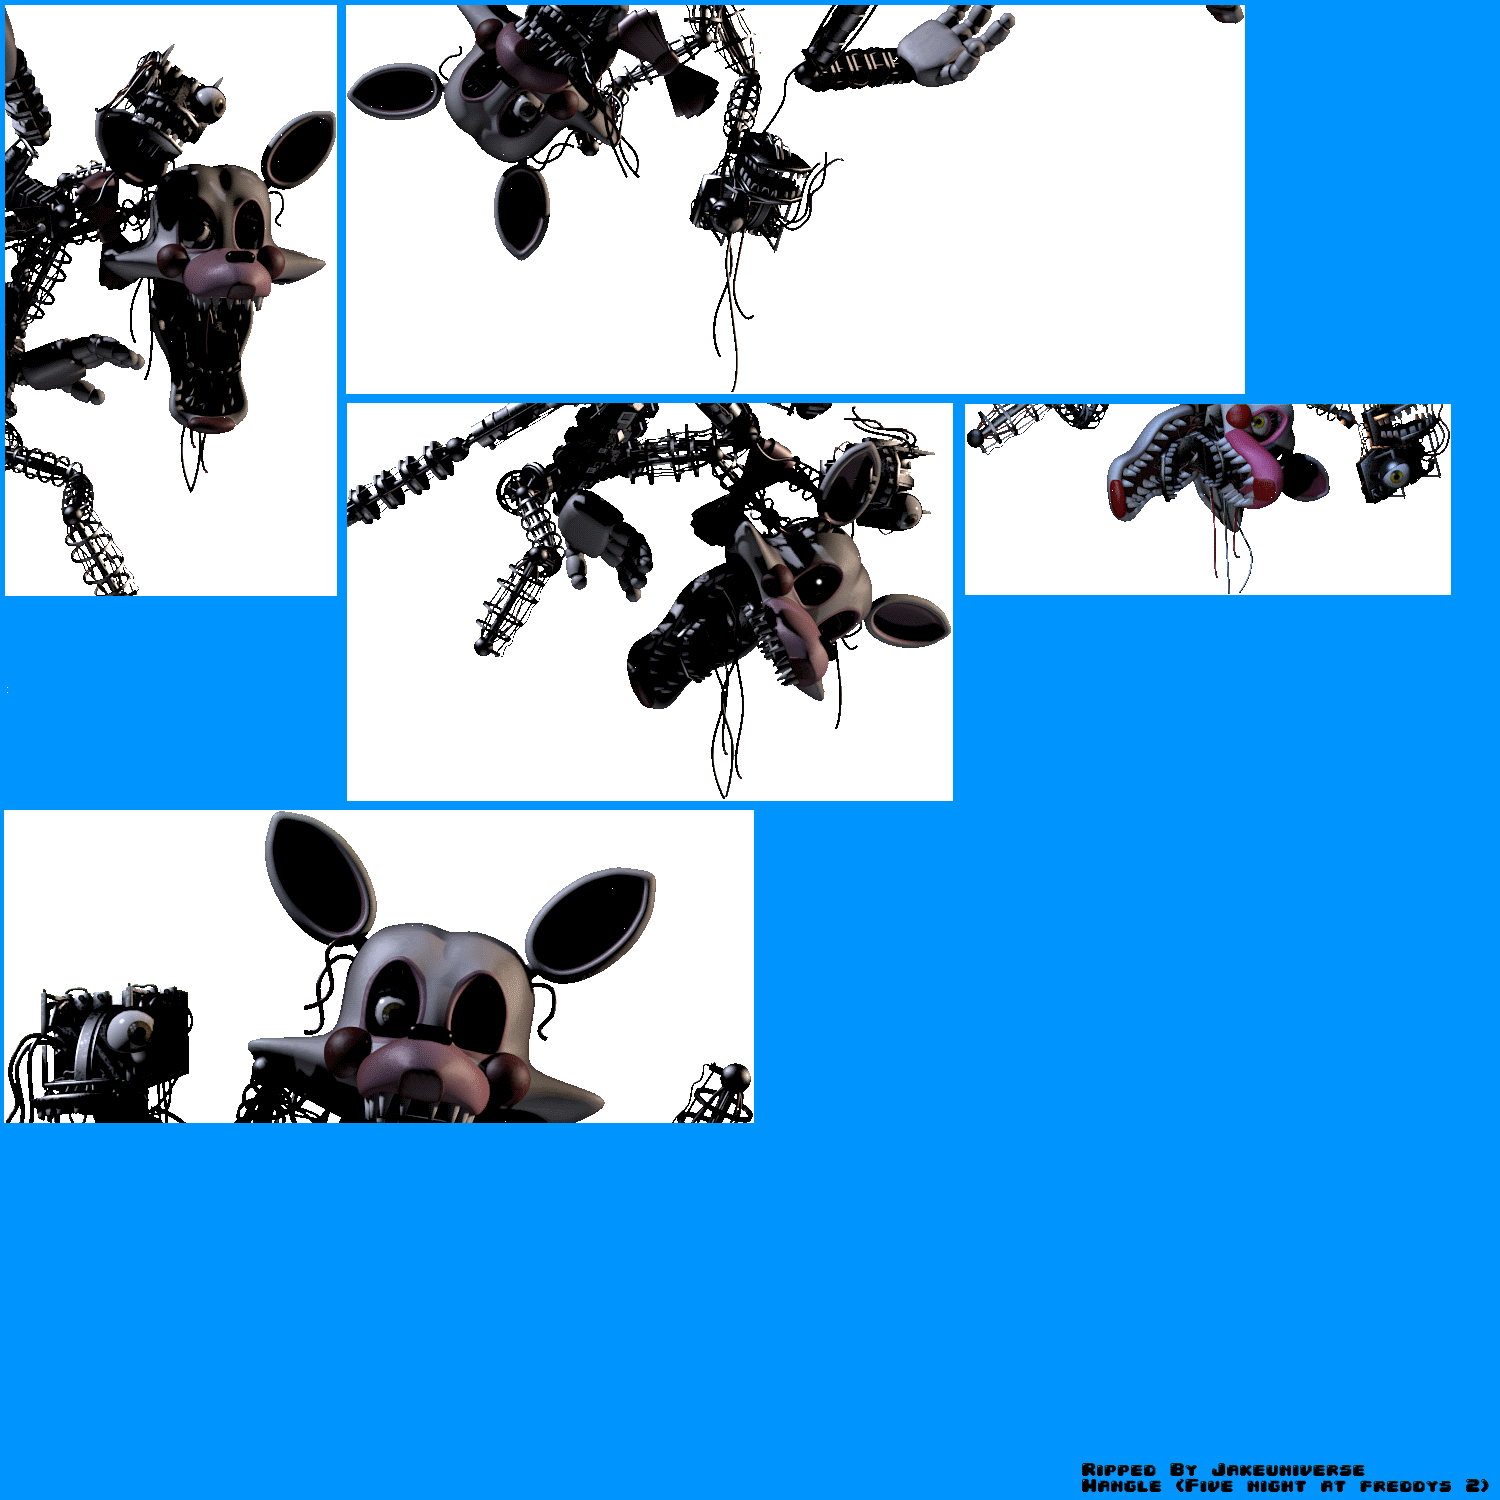 Five Nights at Freddy's 2 (Mobile), Five Nights at Freddy's Wiki